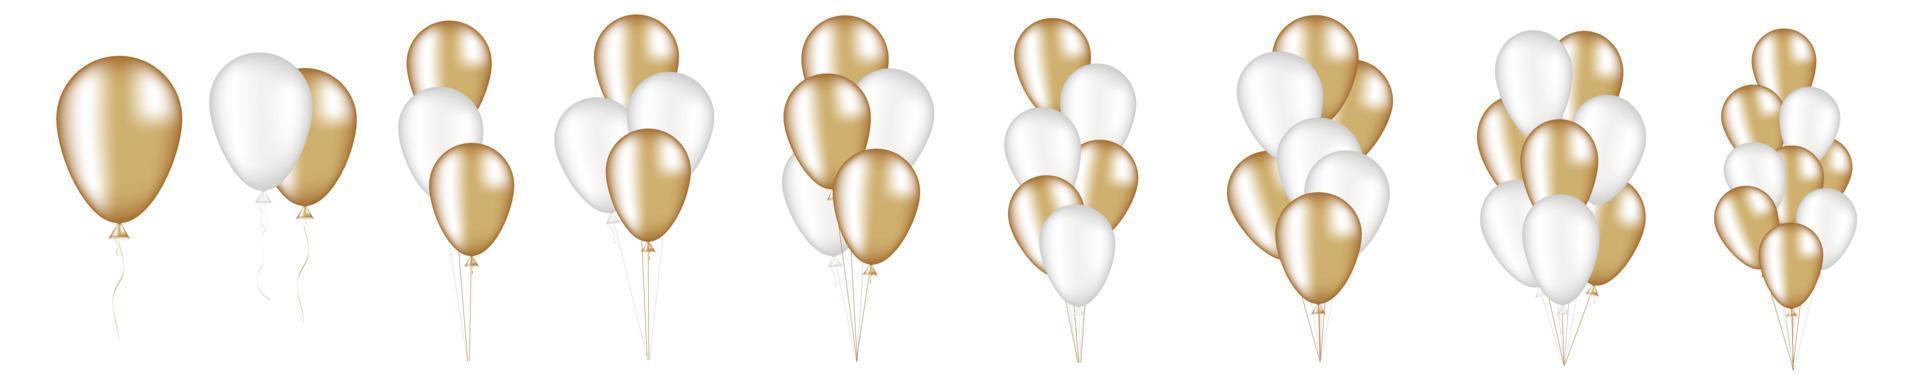 Big set of realistic golden and white balloons. Bouquets of balloons of various sizes vector